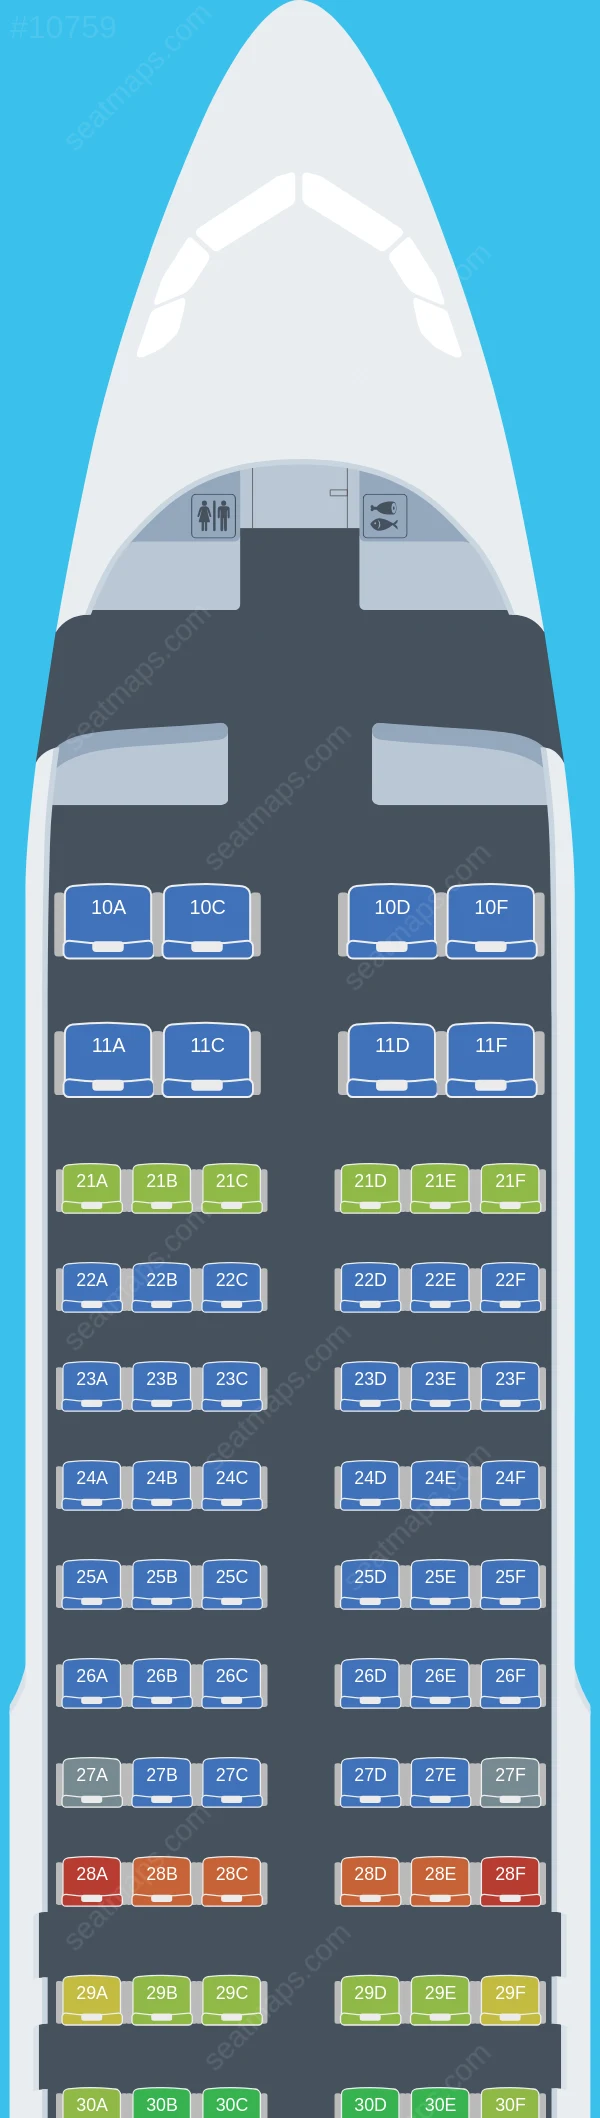 Bamboo Airways Airbus A320neo V.3 seatmap preview